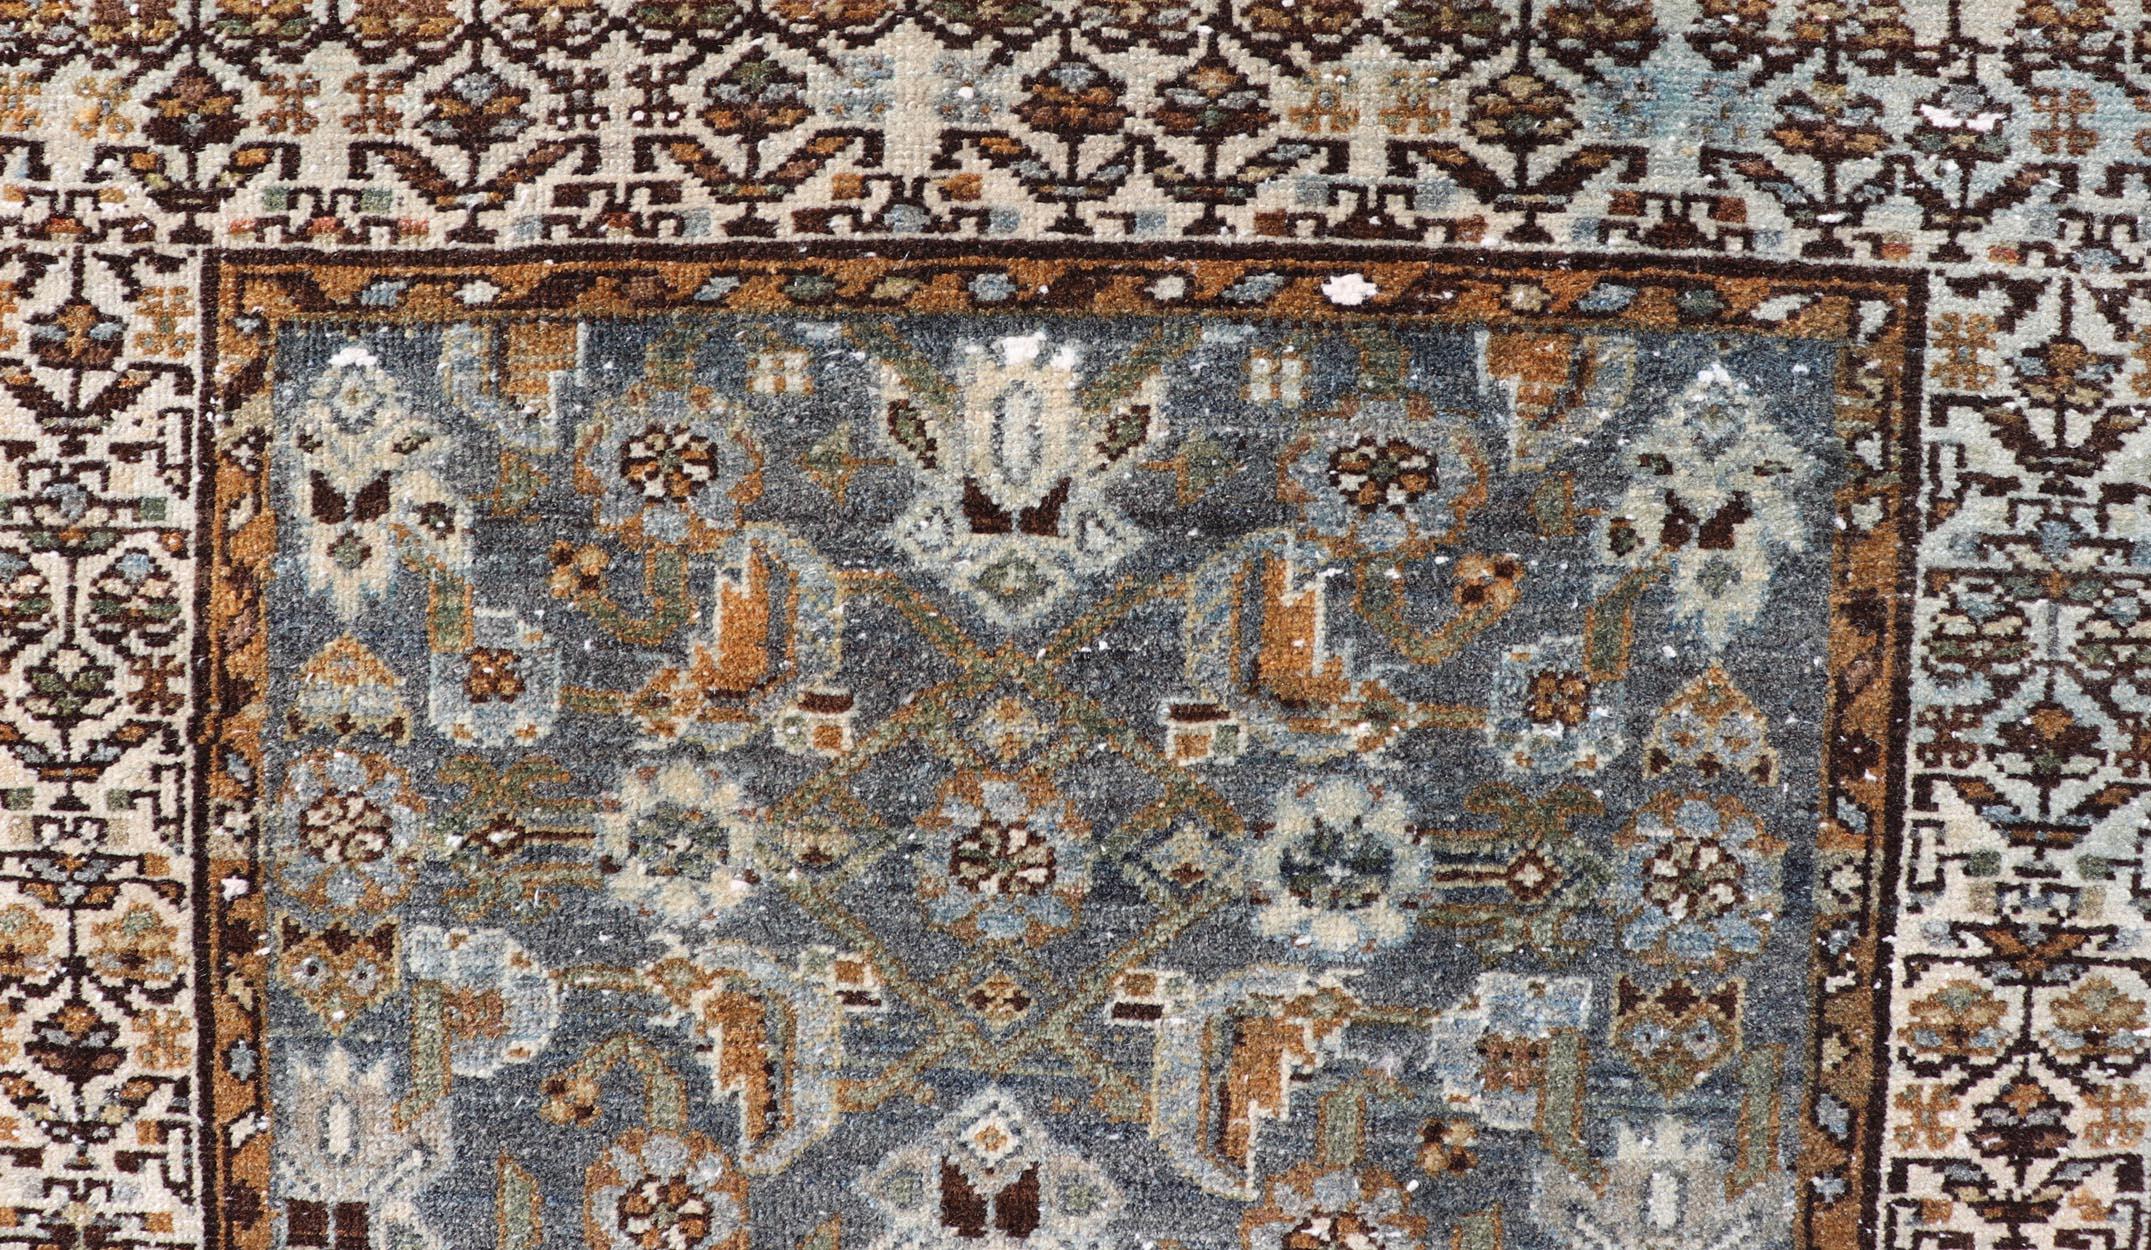 Antique Persian Malayer Rug with All-Over Tribal Design On A Blue Field. Keivan Woven Arts / rug V21-1207, country of origin / type: Iran / Malayer, circa 1910.
Measures: 2'7 x 4'6 
This antique Persian Malayer rug, circa early 20th century, relies